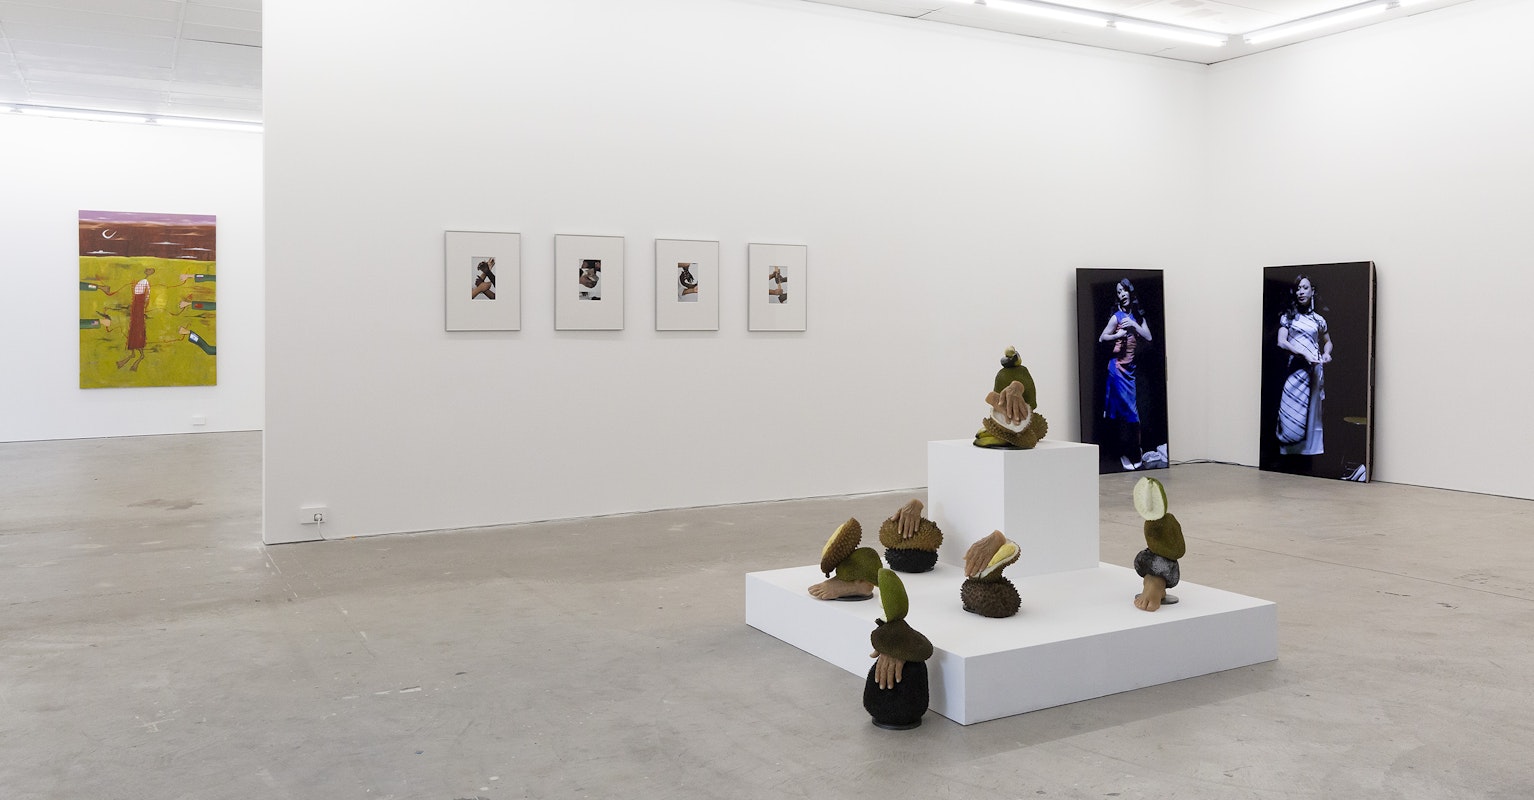 Installation view of Gertrude Studios 2023, featuring works by Mia Boe, Arini Byng, Scotty So and Nathan Beard. Photo: Christian Capurro